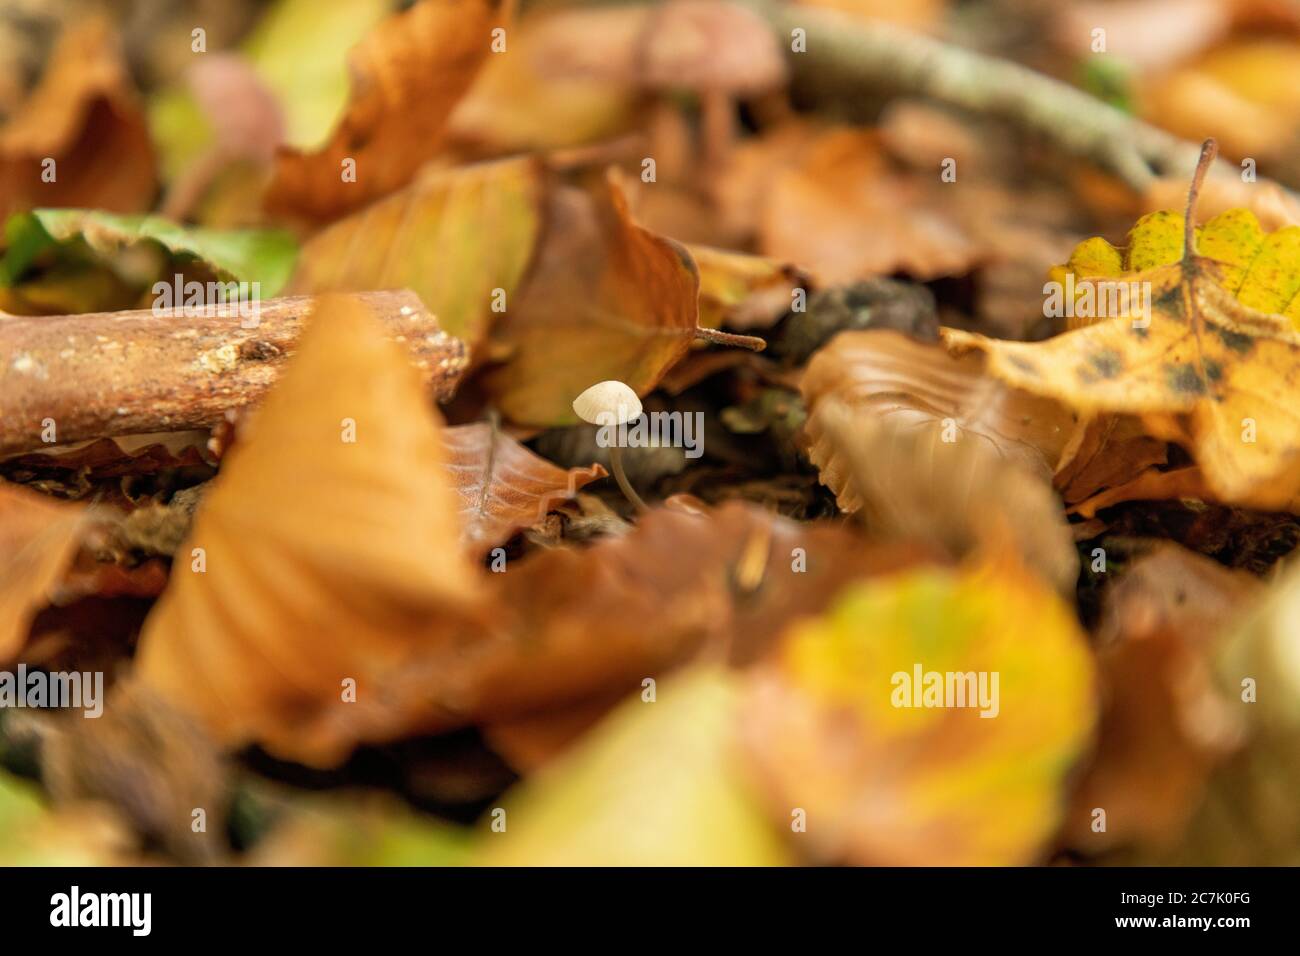 Selective focus shot of a small forest mushroom surrounded by yellow leaves Stock Photo